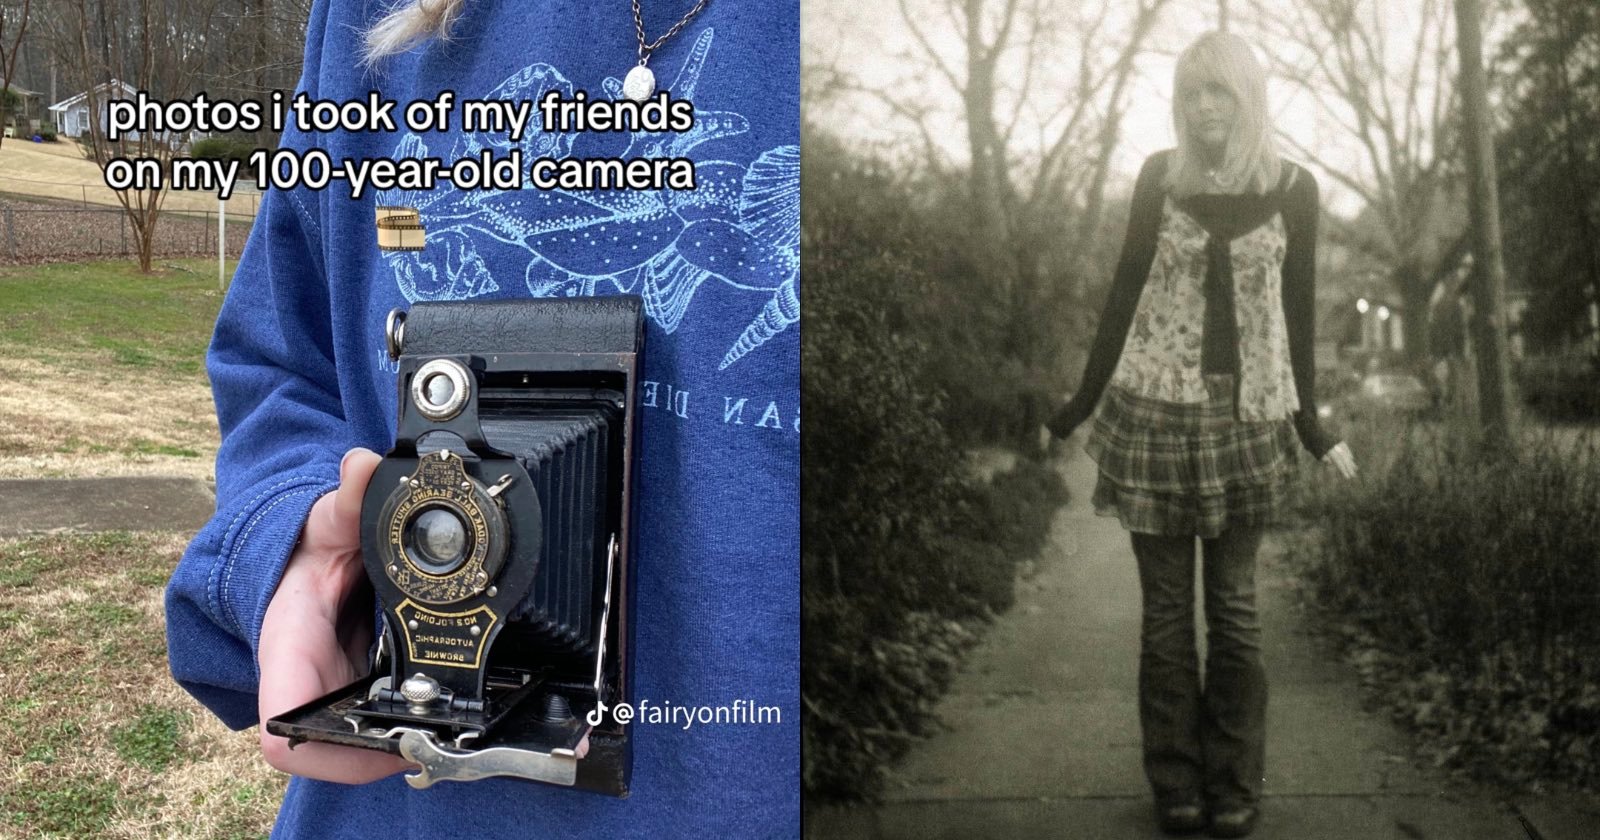 Teen Photographer Shoots Portraits of Her Friends on a 100-Year-Old Camera